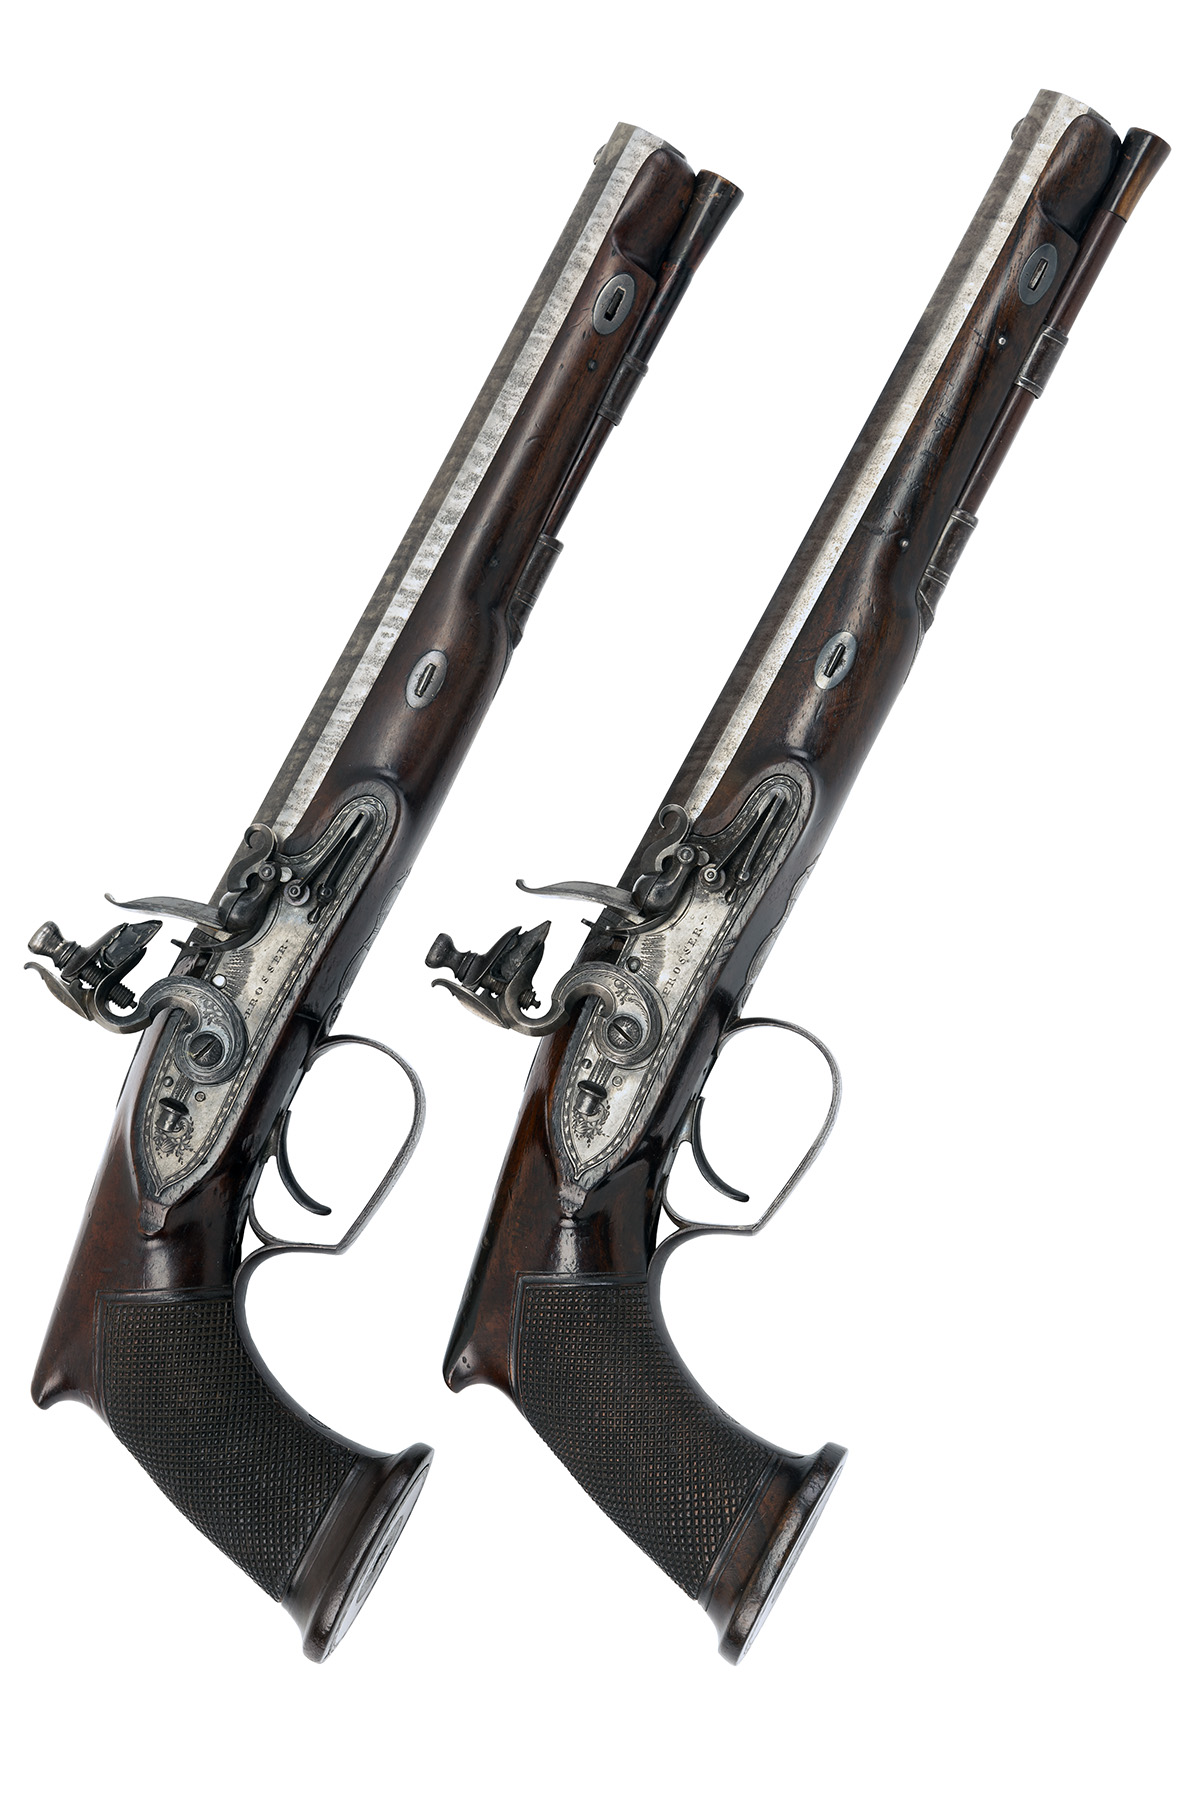 A CASED PAIR OF SAW-HANDLED 28-BORE FLINTLOCK DUELLING PISTOLS BY J. PROSSER, LONDON, no visible